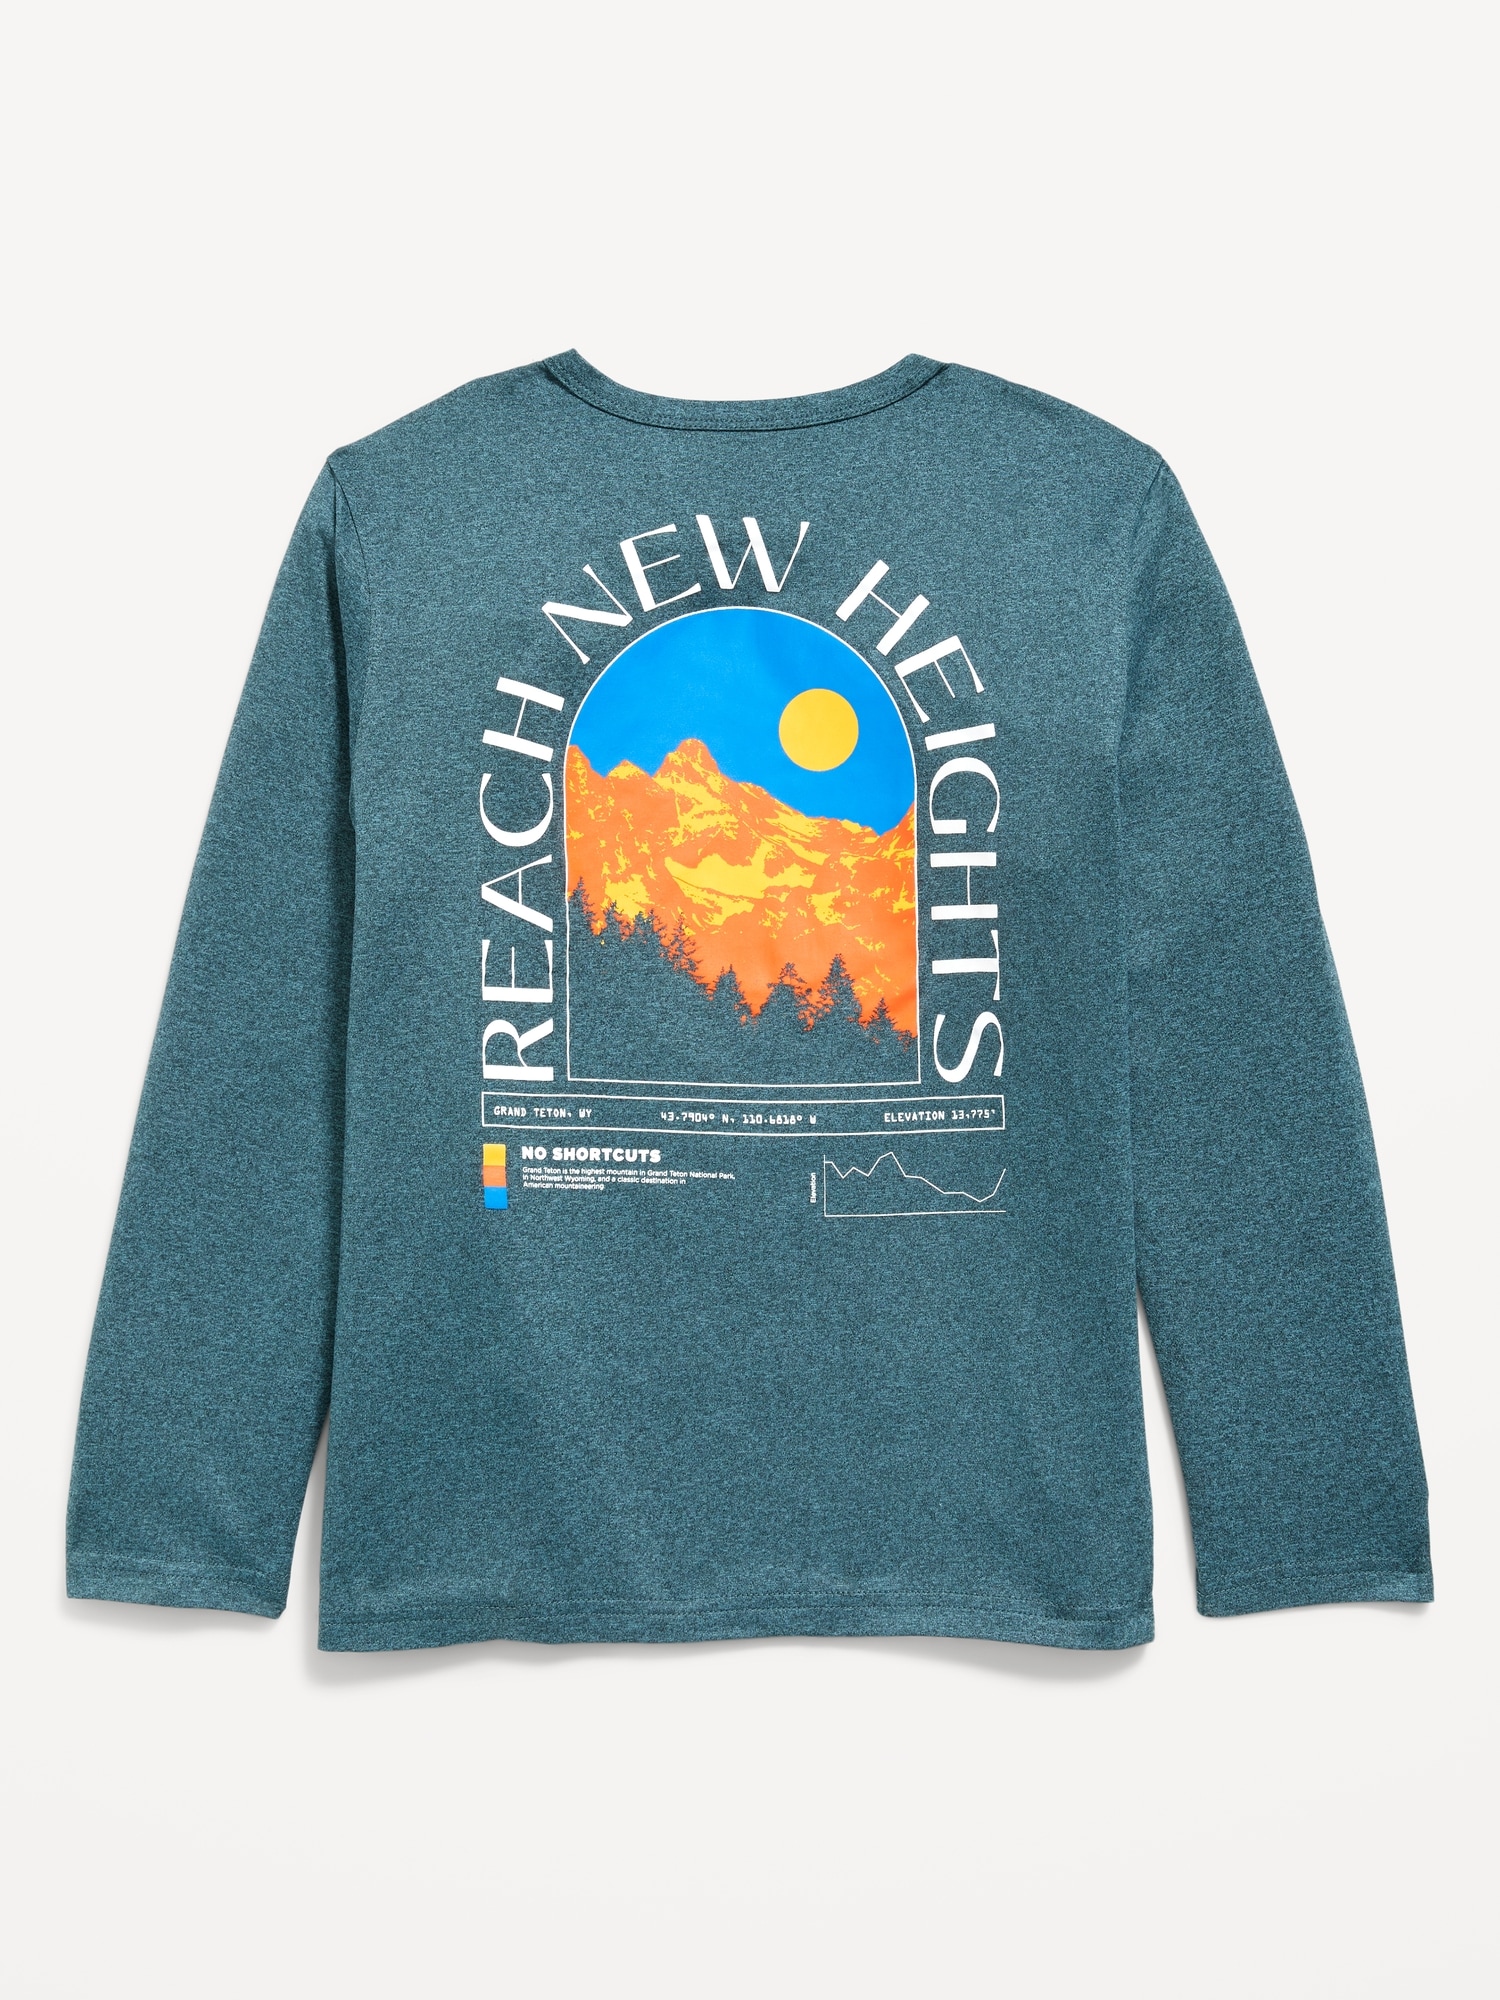 Cloud 94 Soft Long-Sleeve T-Shirt for Boys | Old Navy